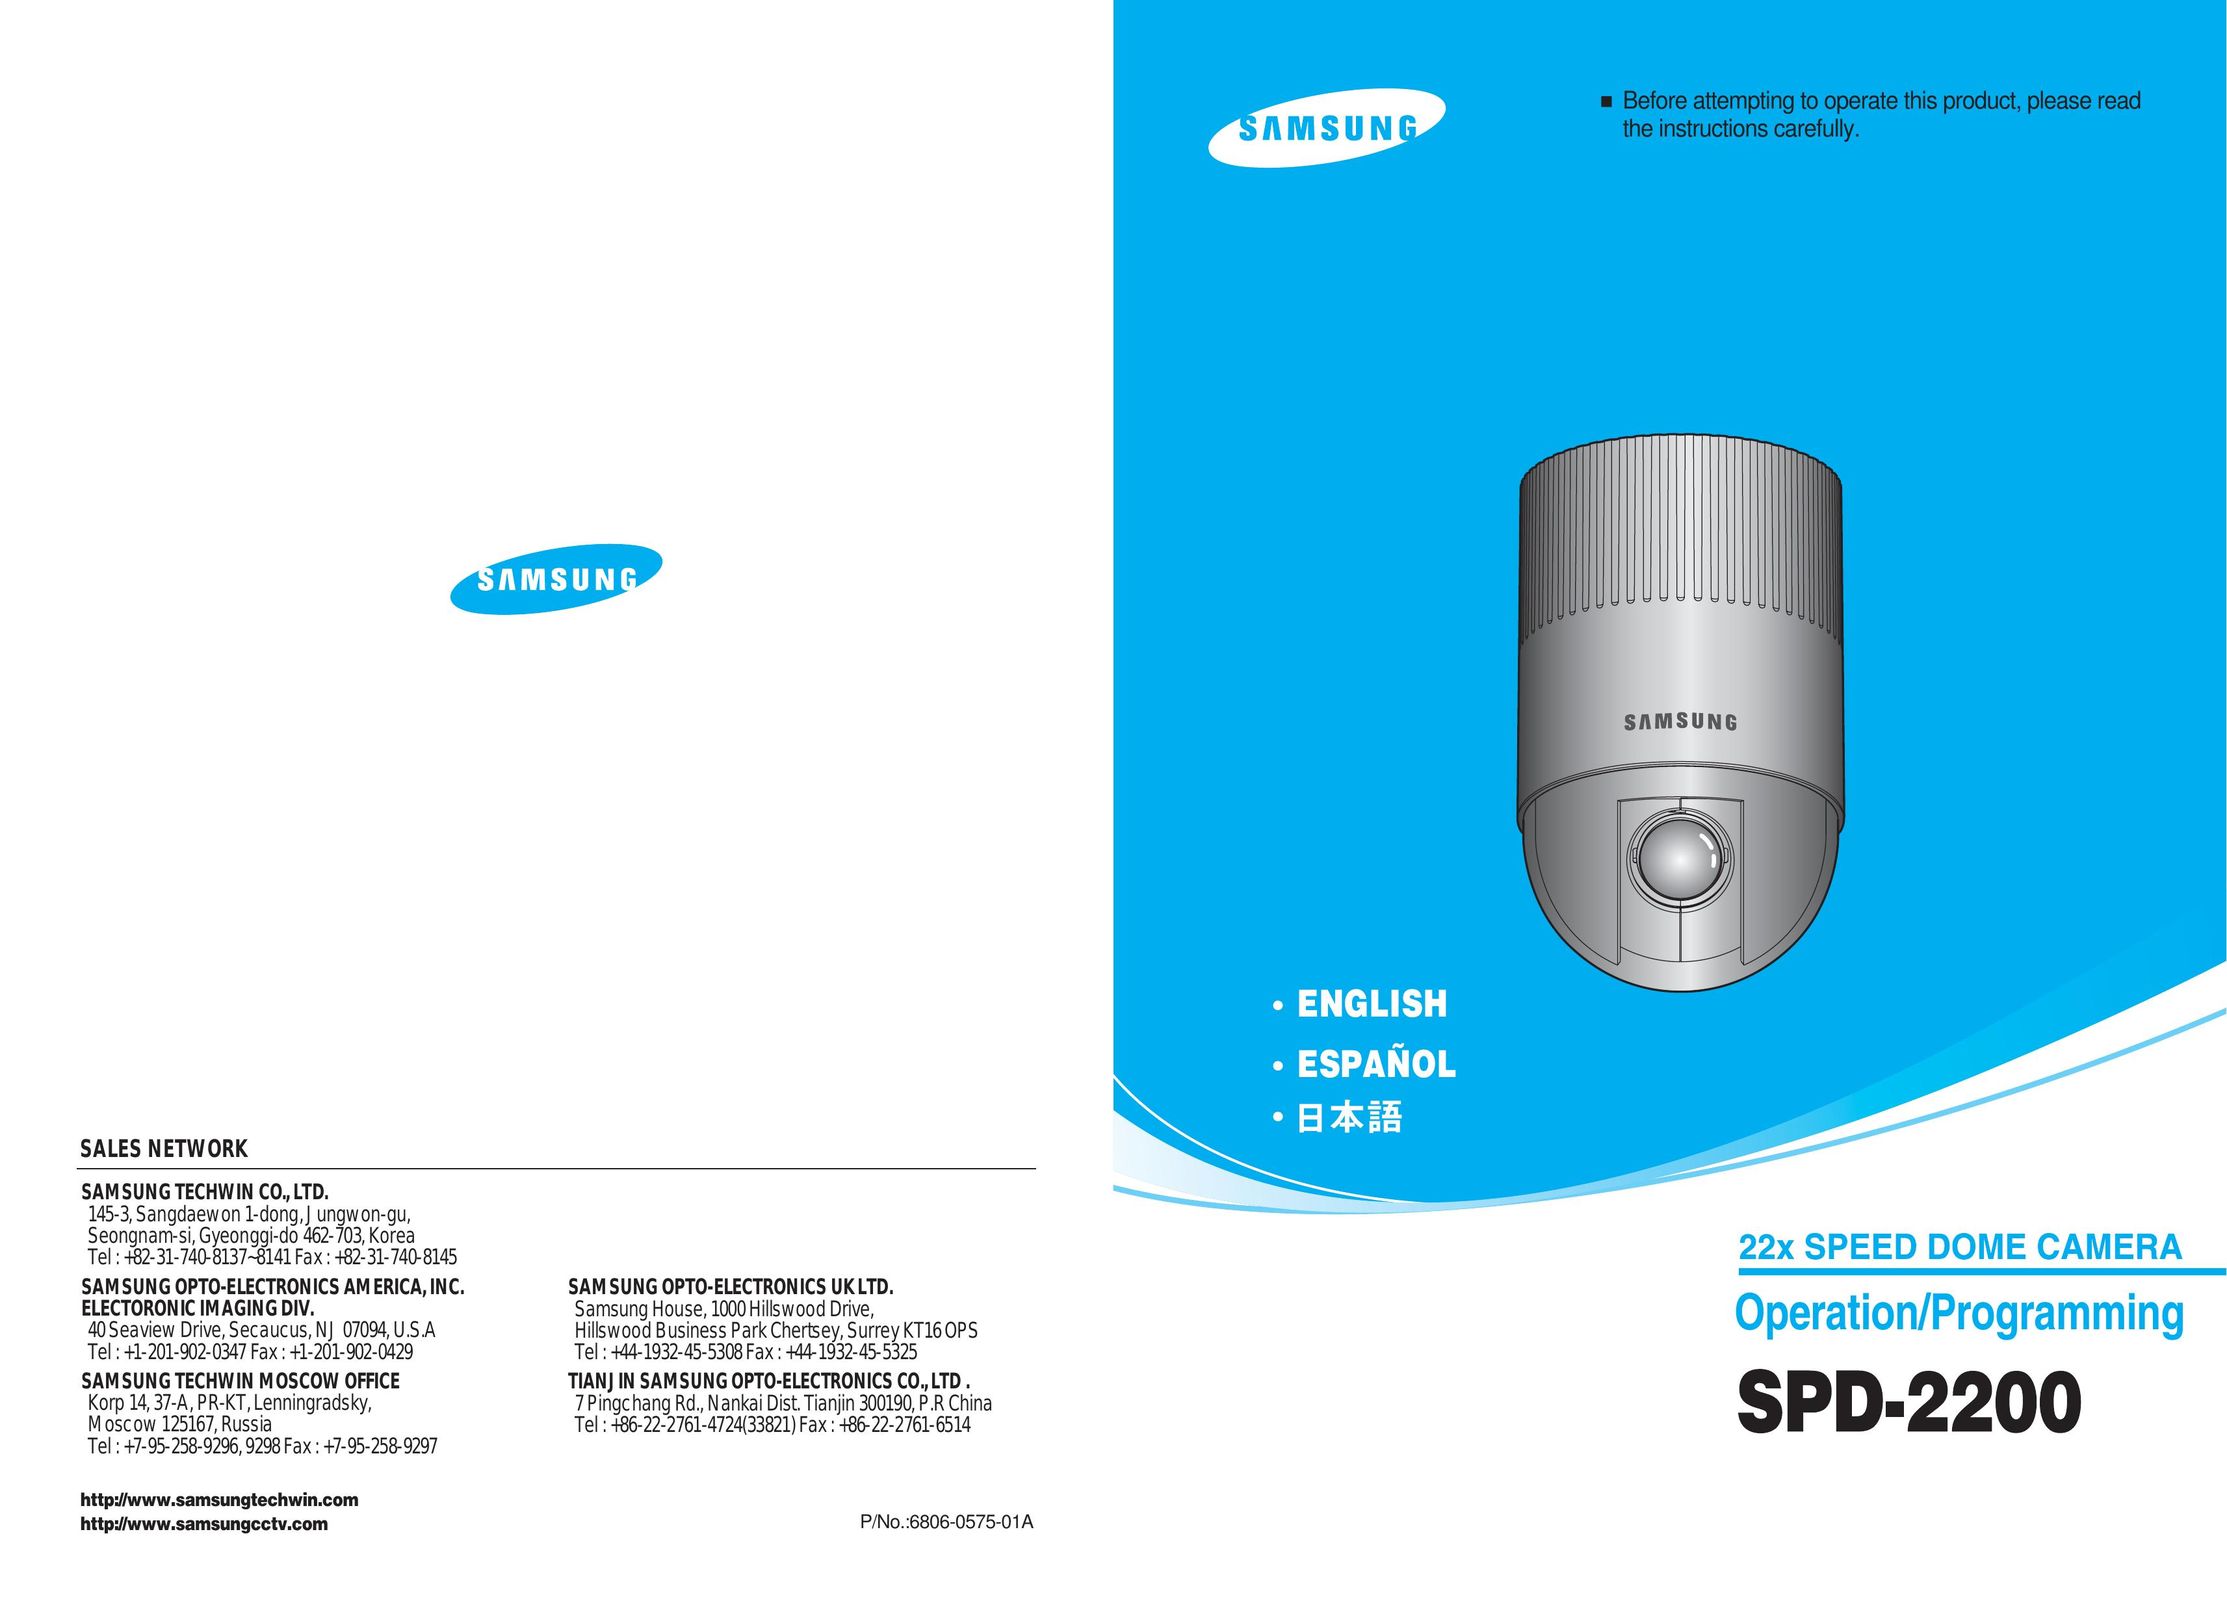 Samsung SPD-2200 Home Security System User Manual